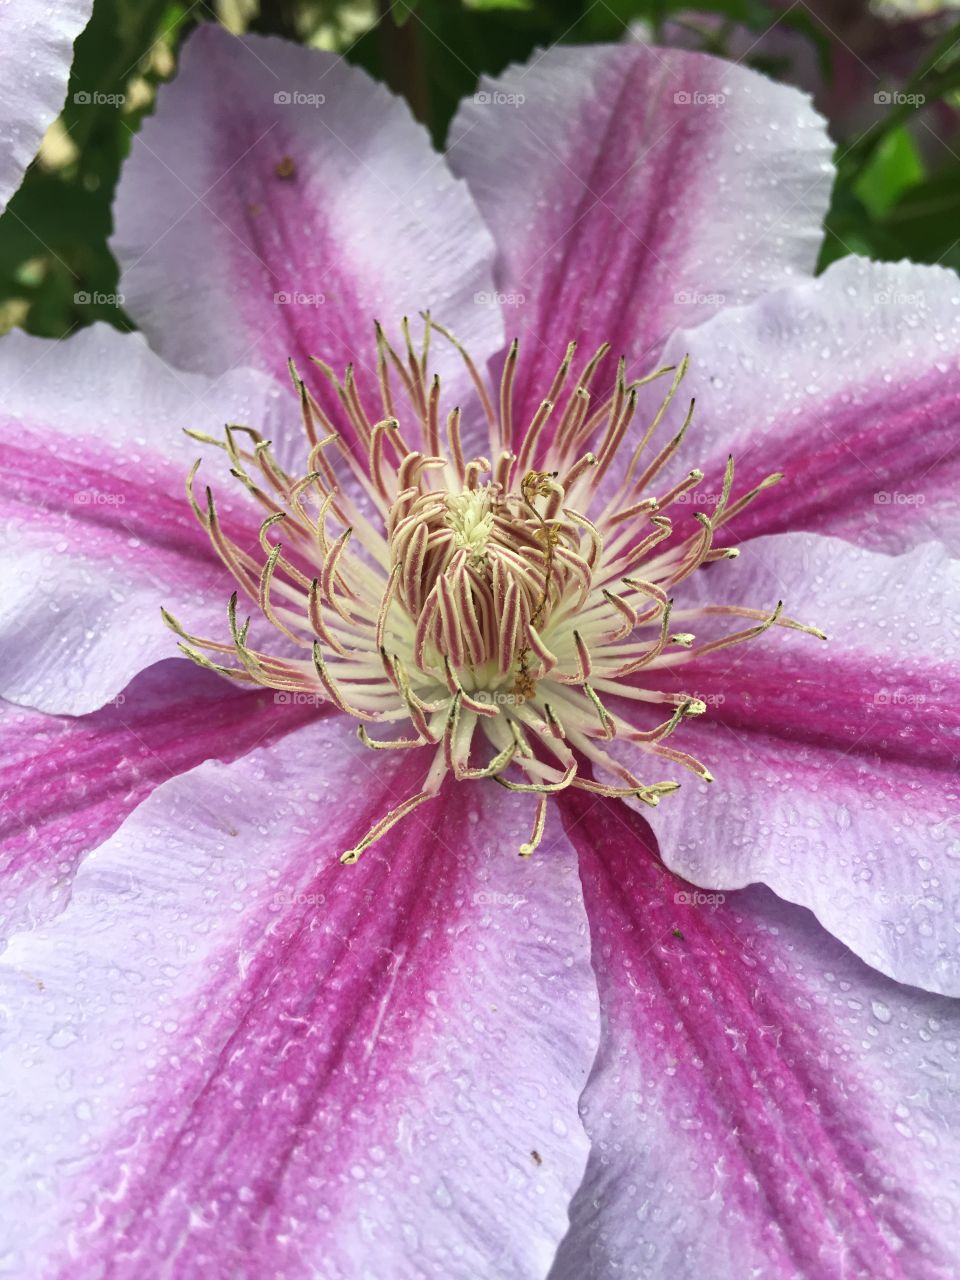 Close up of a pink and white clematis flower with spring rain droplets / dew on it